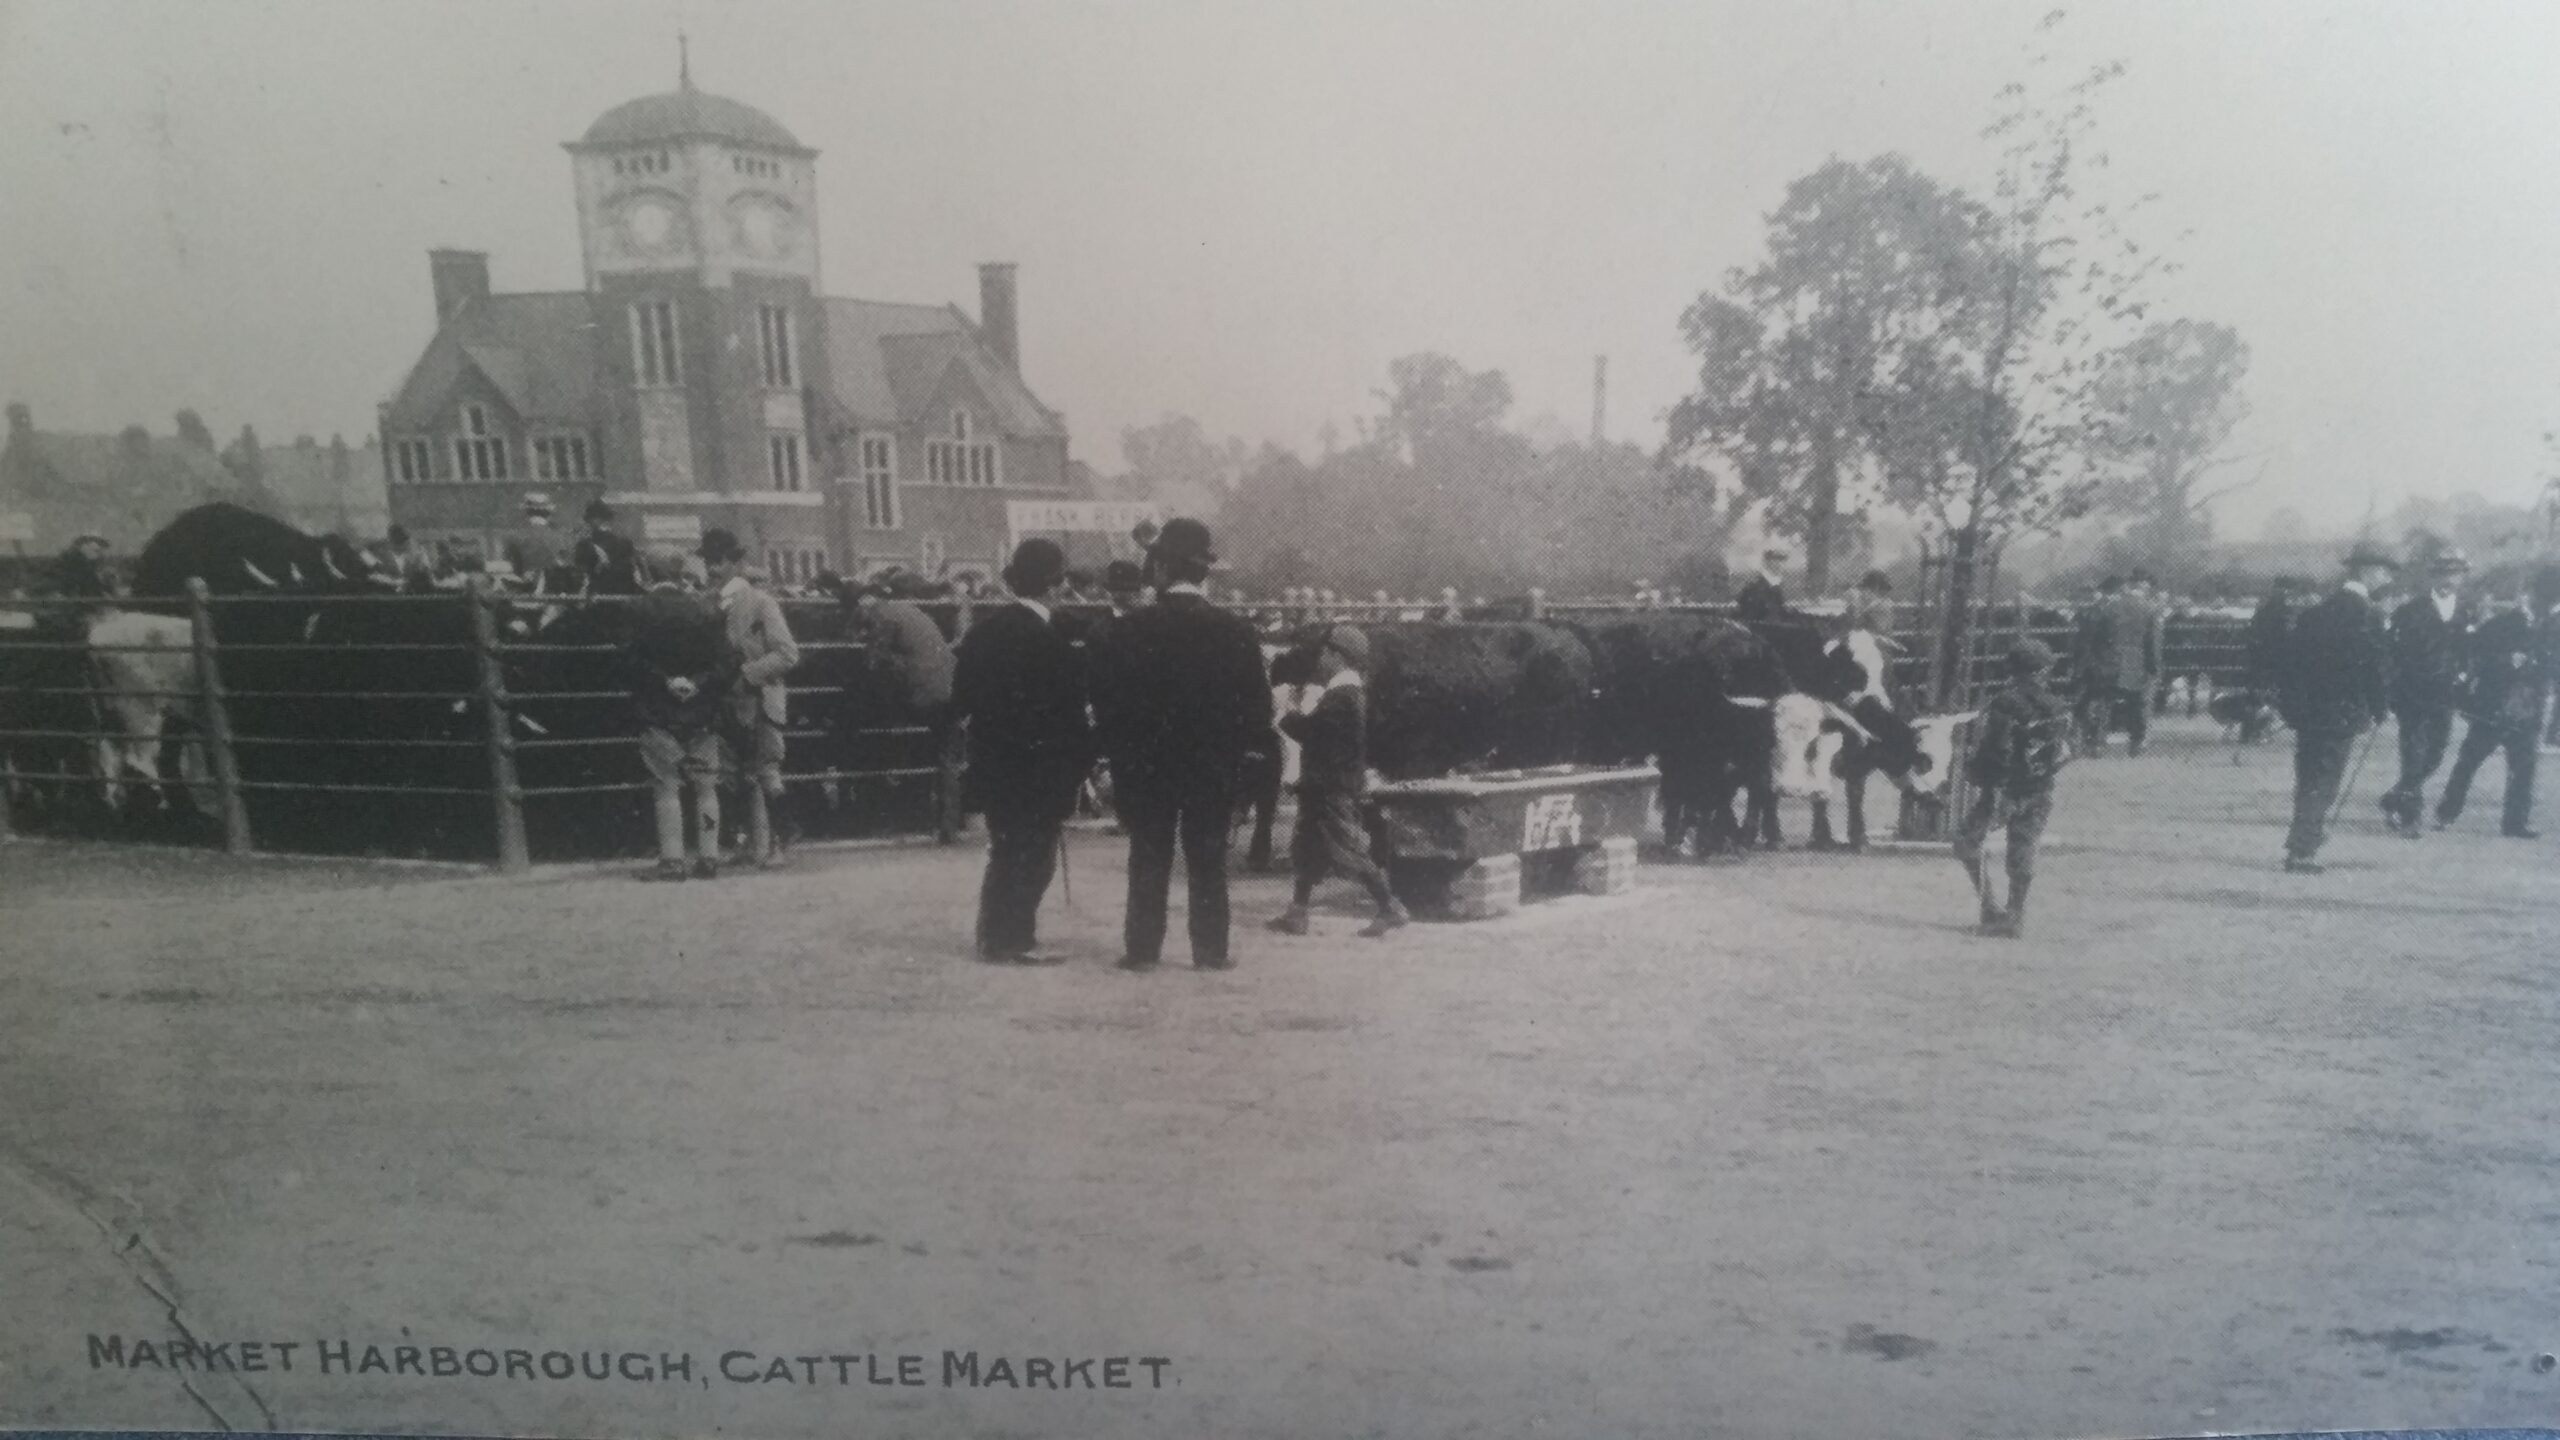 The old cattle market in Market Harborogh